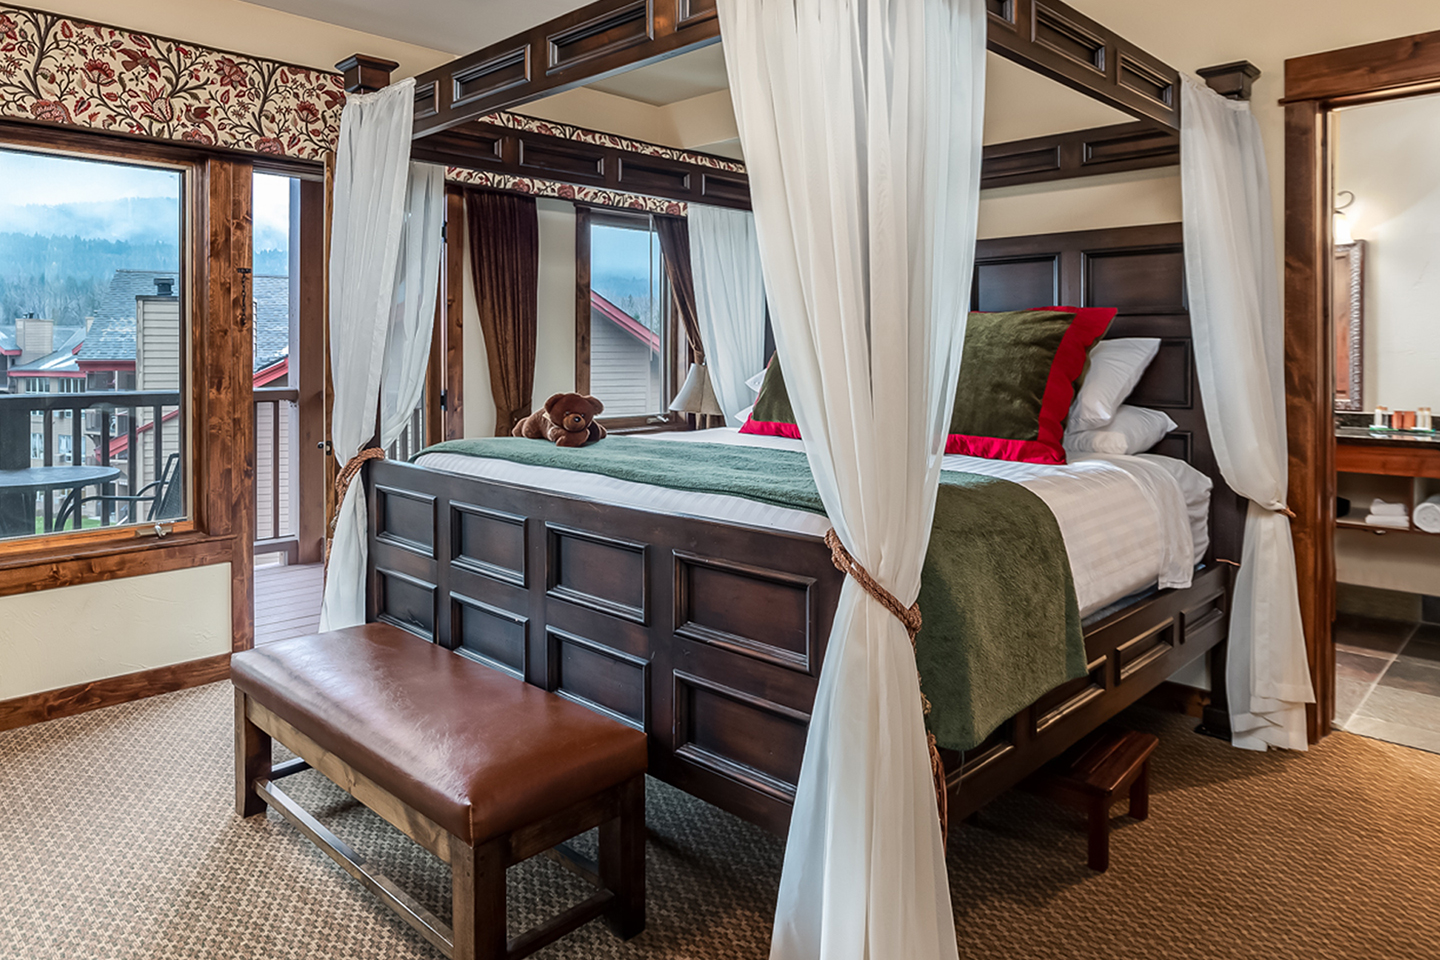 A Master Bedroom fit for a King. – Michael Klippert